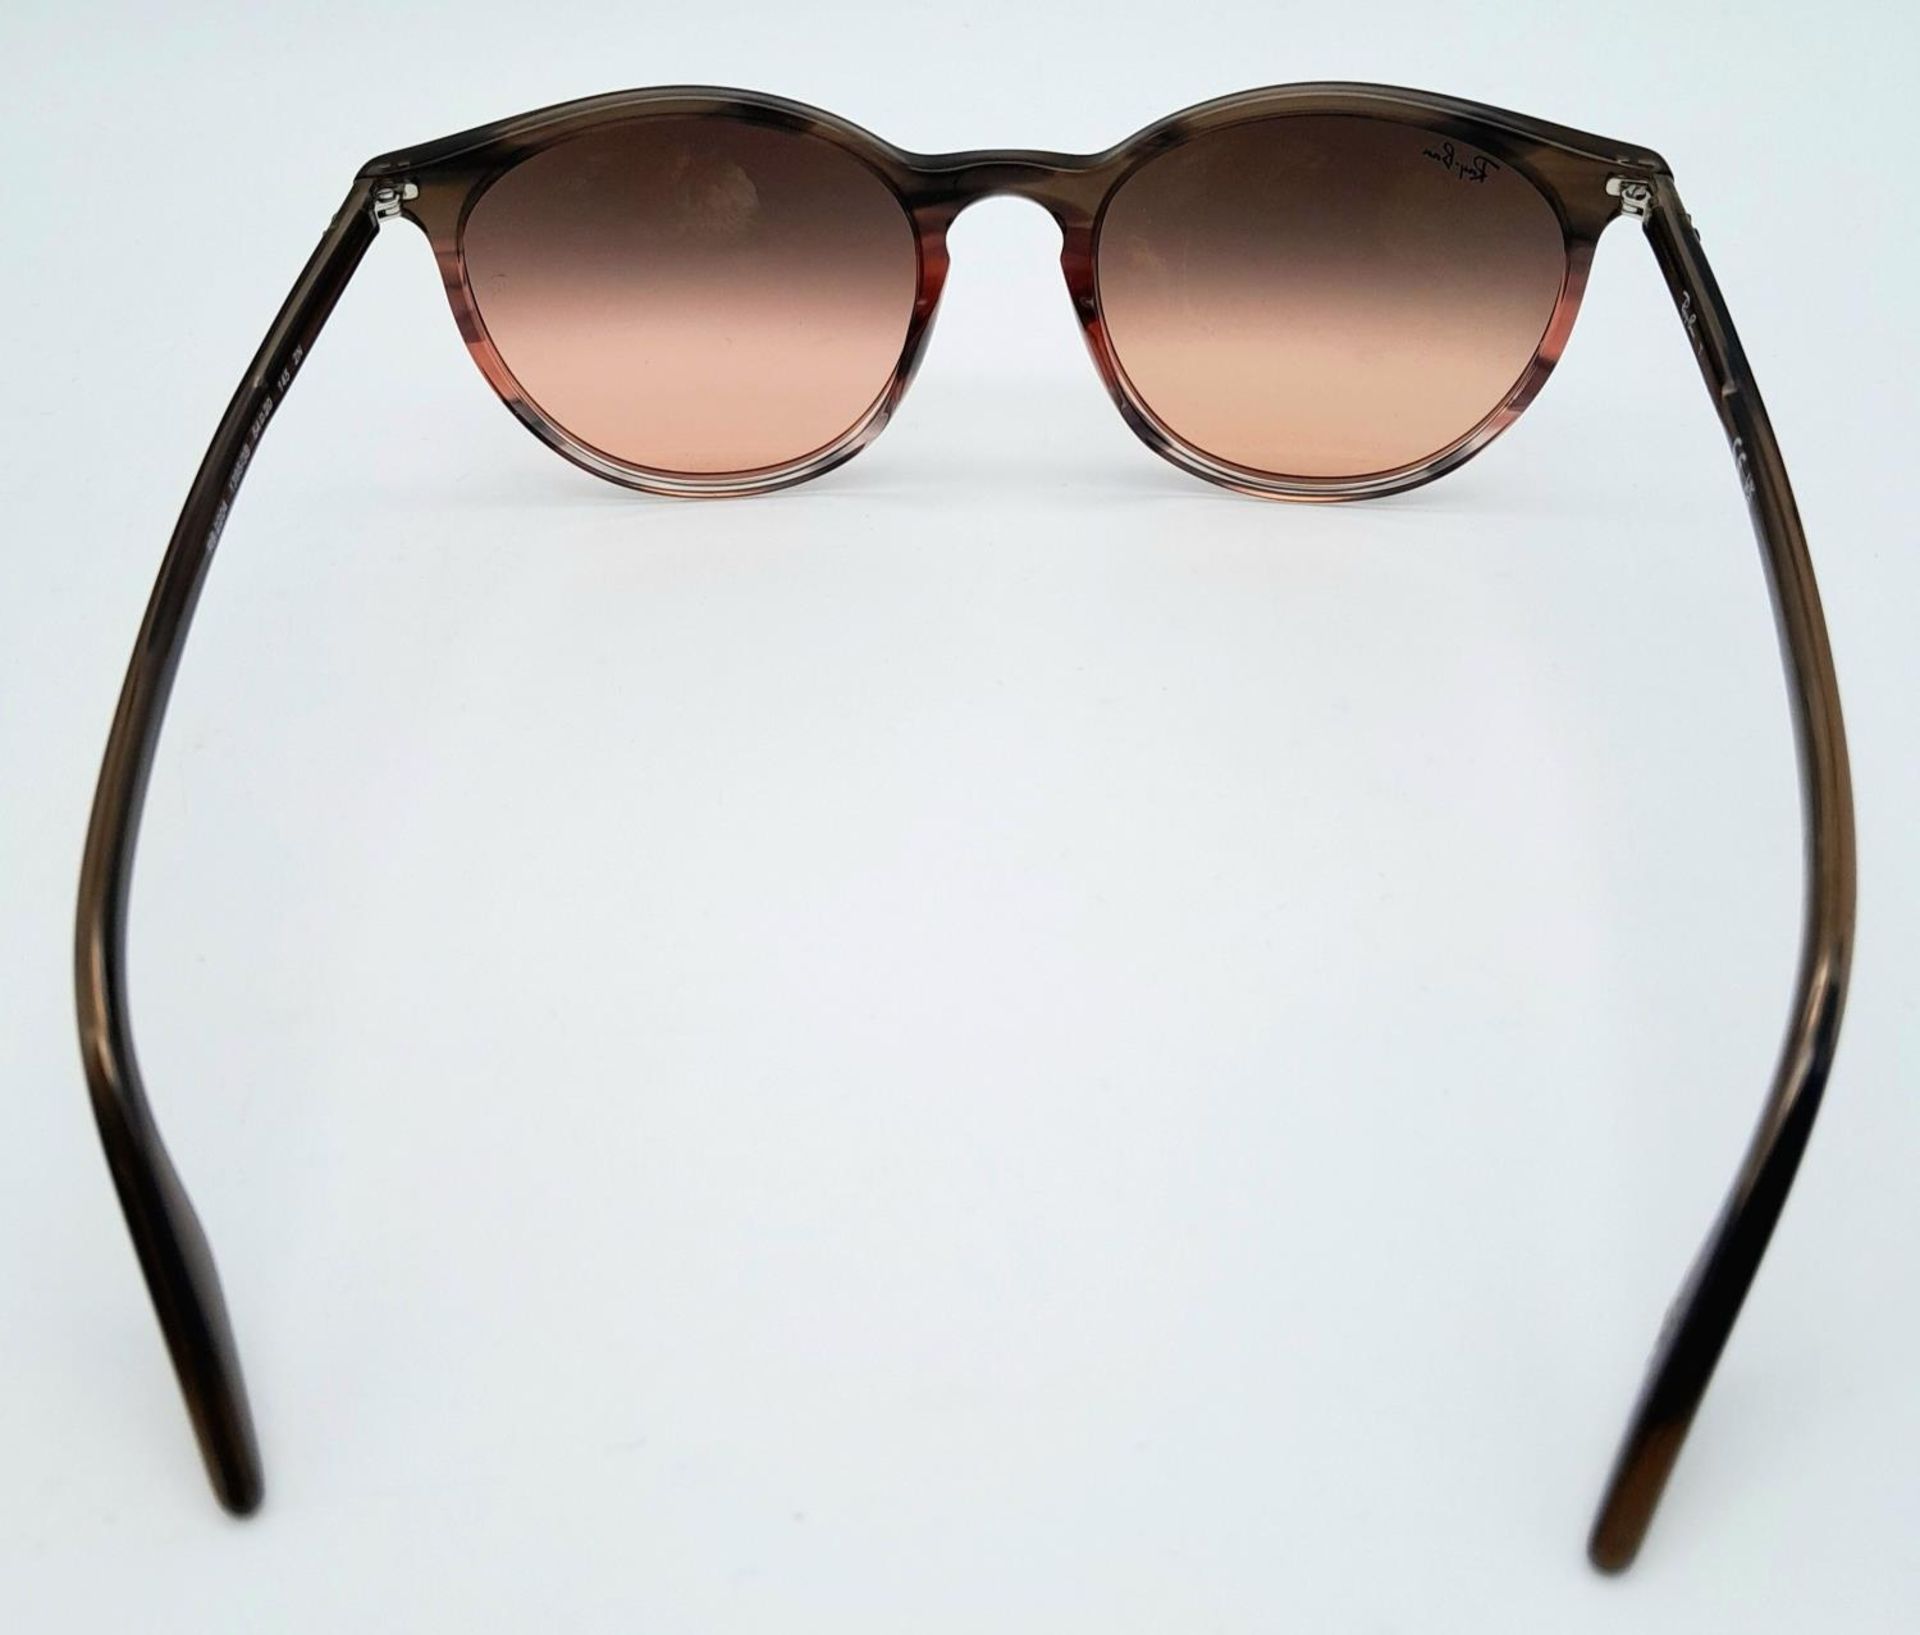 A Pair of Ray-Ban Ladies Sunglasses. - Image 5 of 7